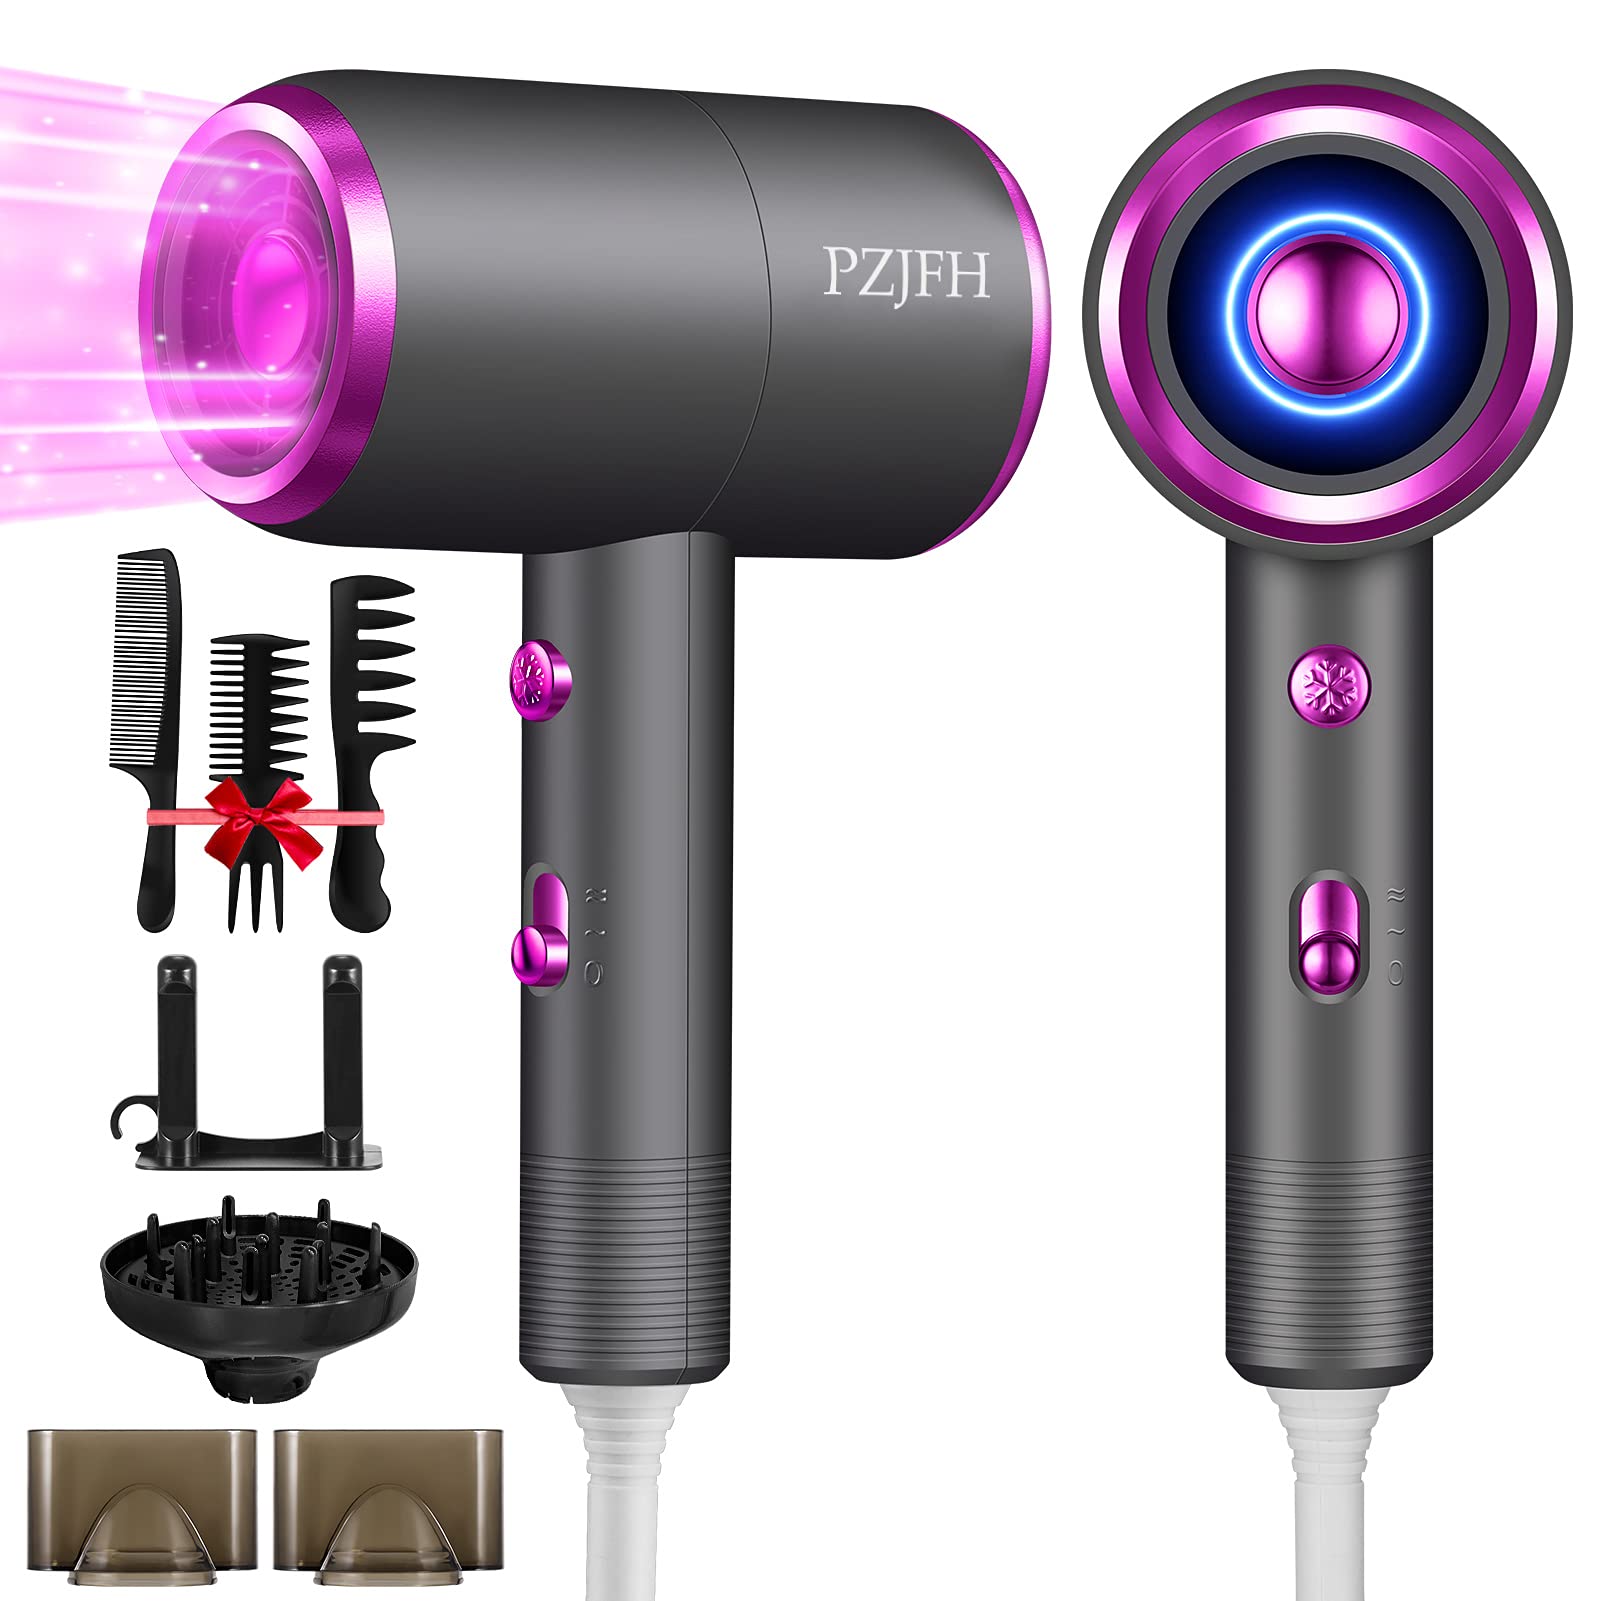 Professional Hair Dryer 1800W Powerful Fast Dry Ionic Blow Dryer, Lightweight Travel Hairdryer with Diffuser for Curly Hair, with Cool Shot Button & 2 Concentrator for Women Salon Home Hair Styling